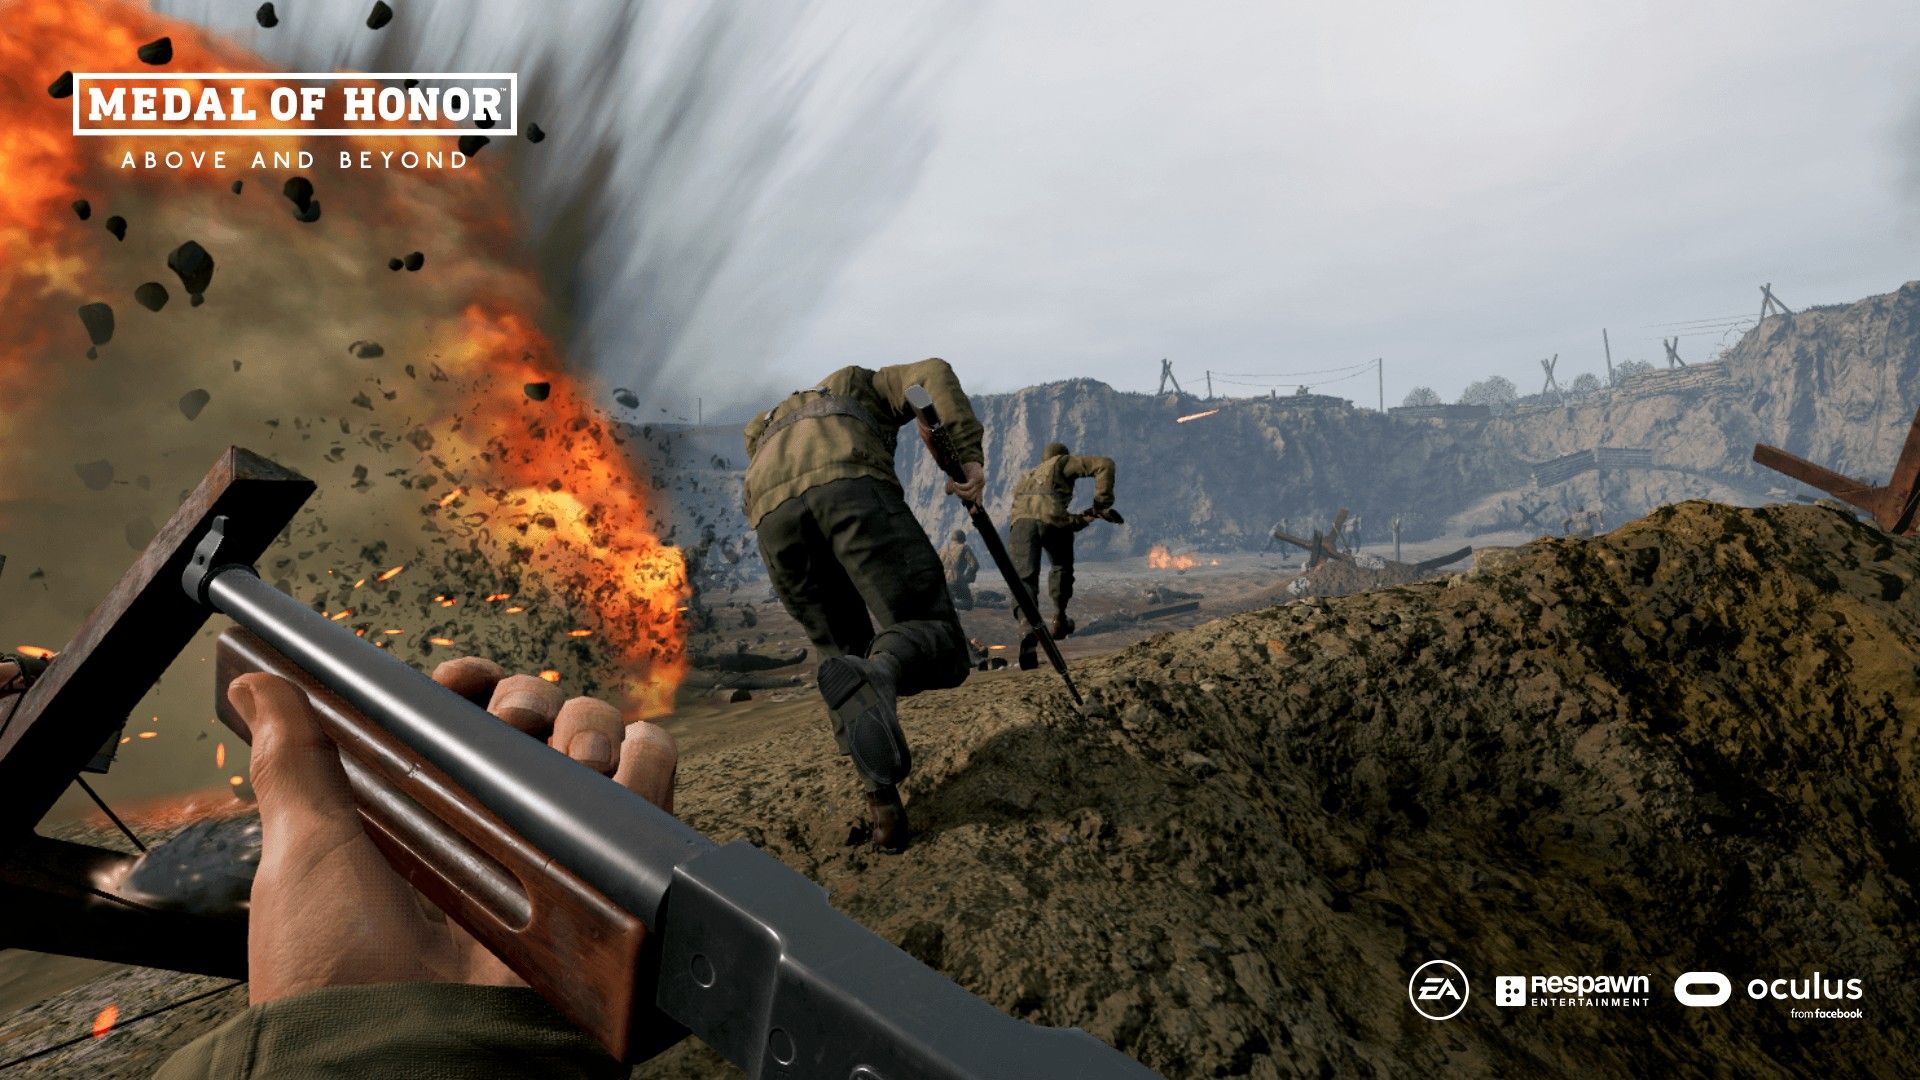 medal of honor above and beyond battlefield screenshot